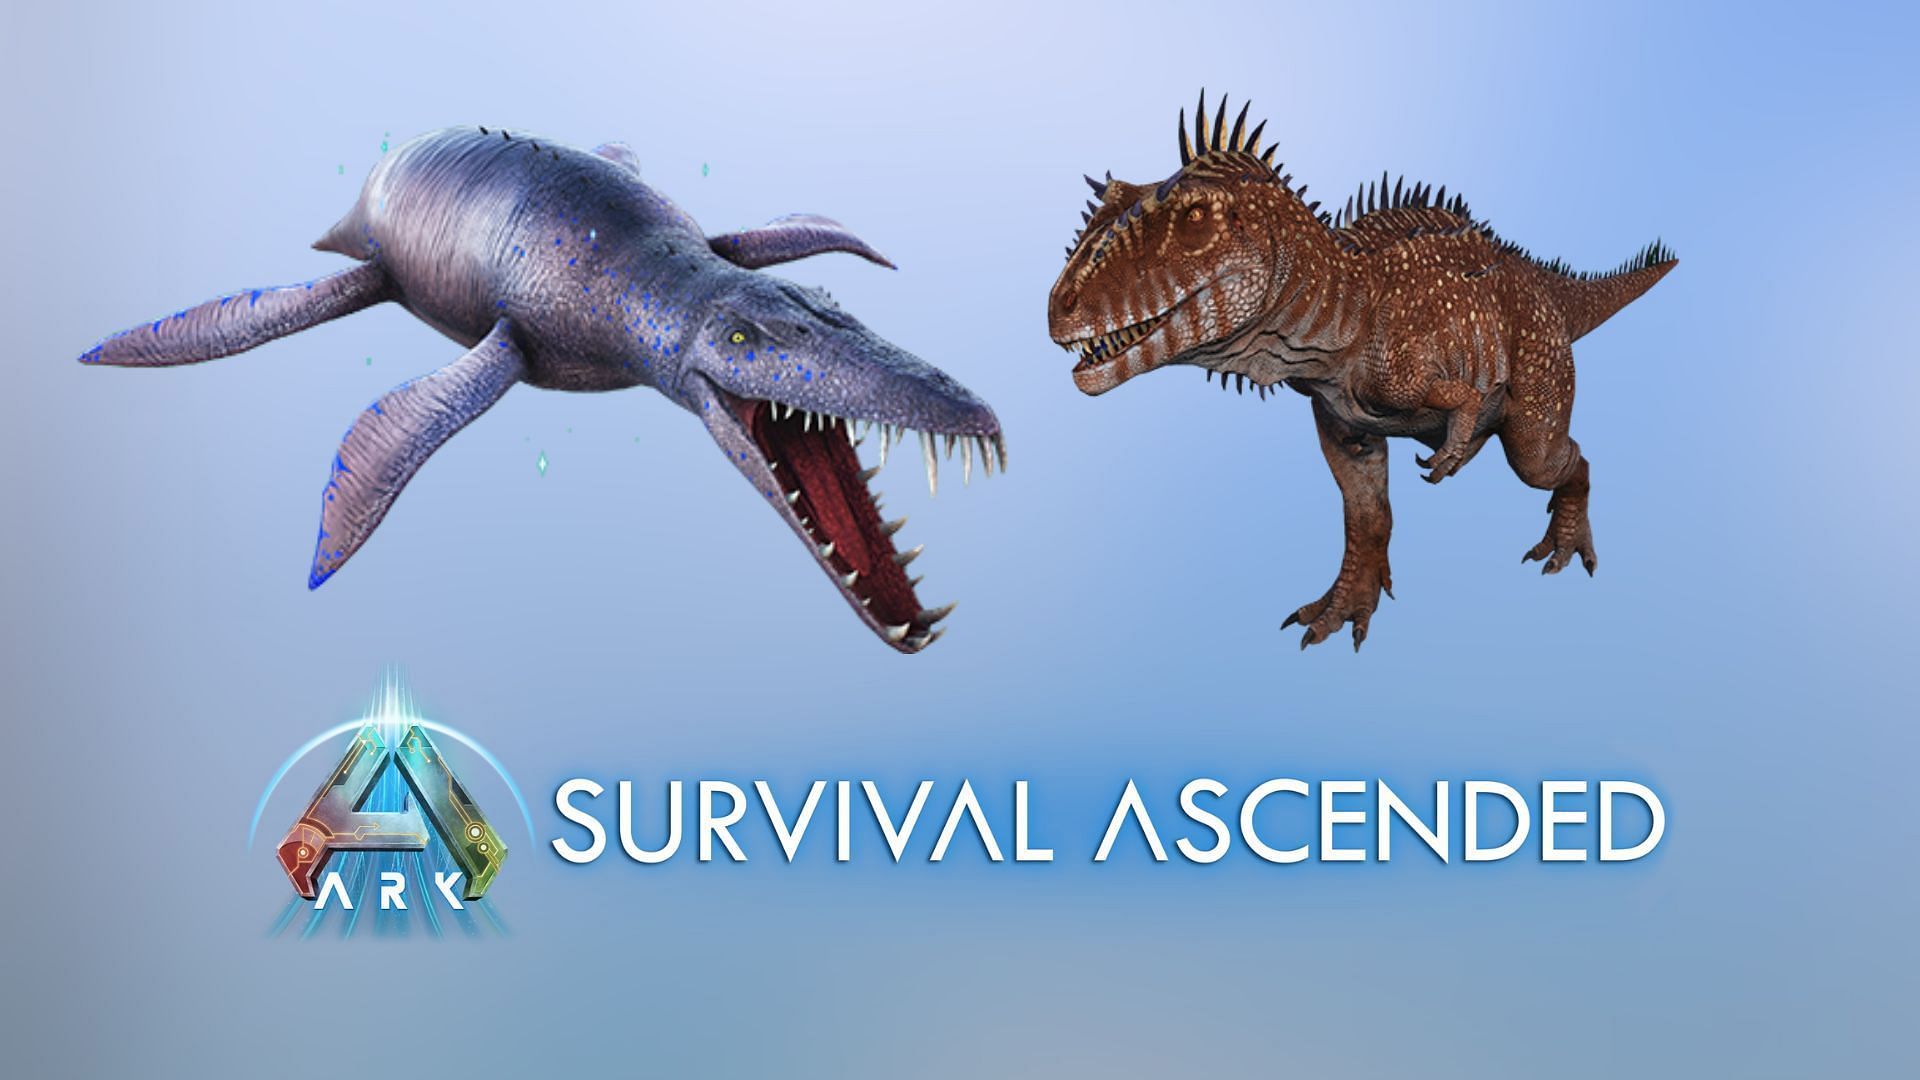 Rare dinos in Ark Survival Ascended